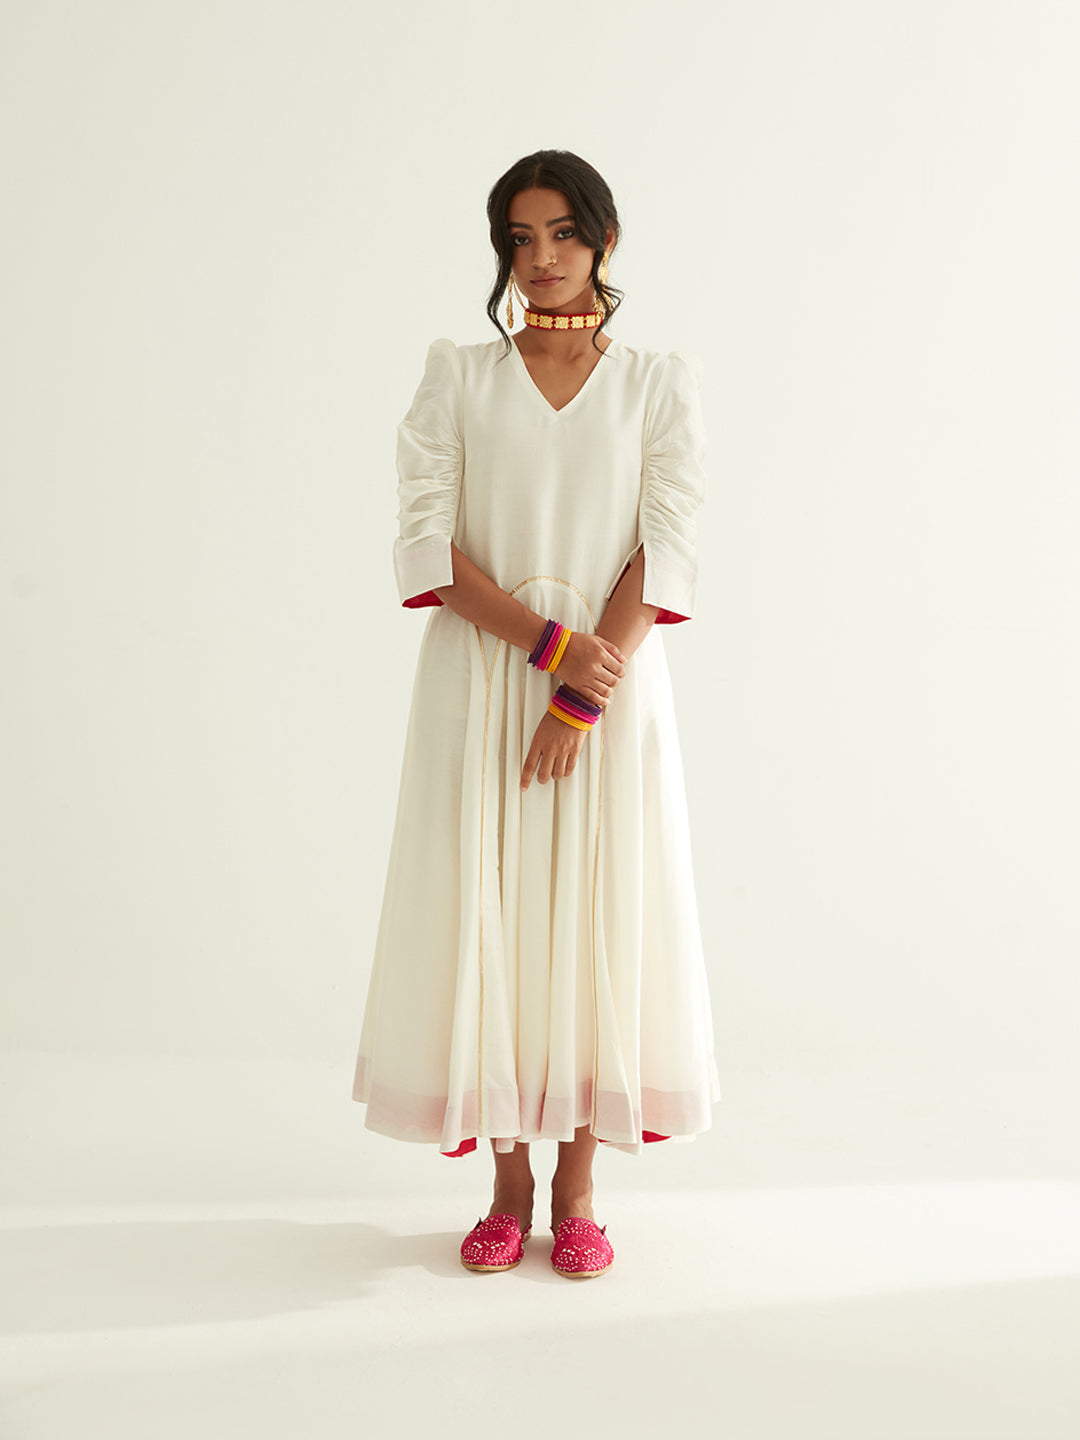 Circular panelled dress highlighted with Gota patti